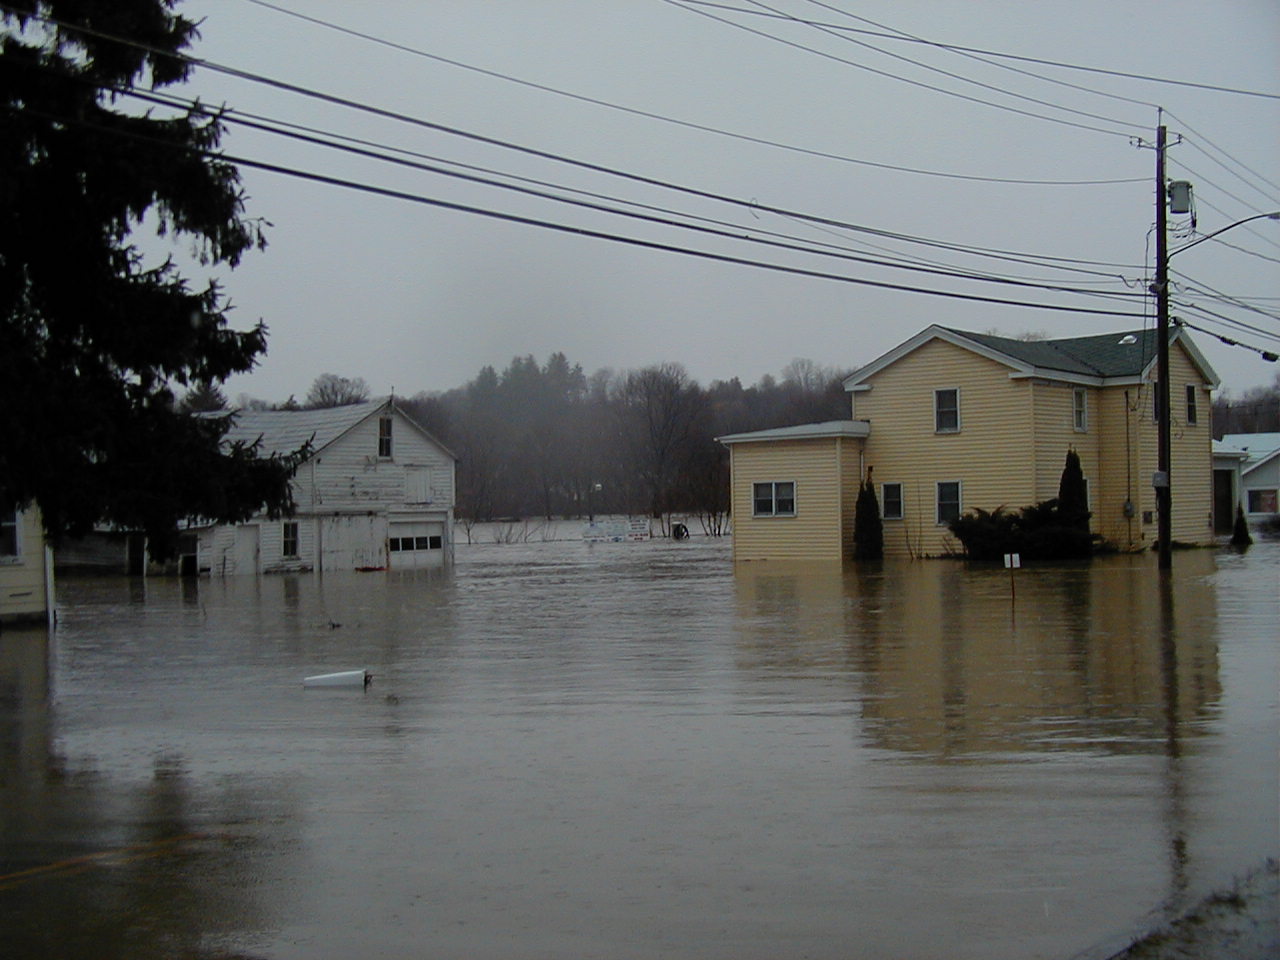 Another shot of house flooding in Marathon, NY.